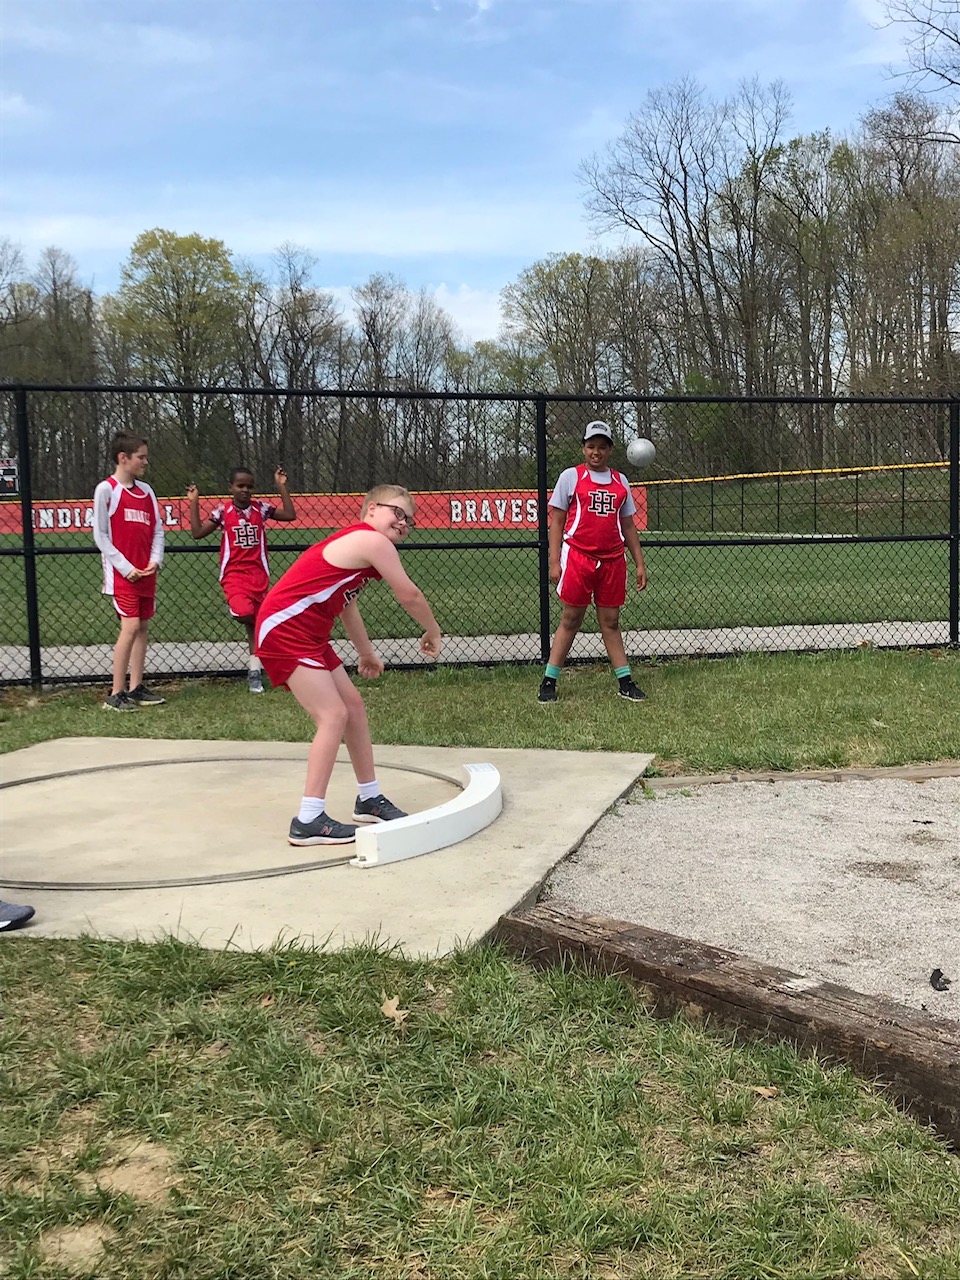 IHMS Unified Track Meet April 2019